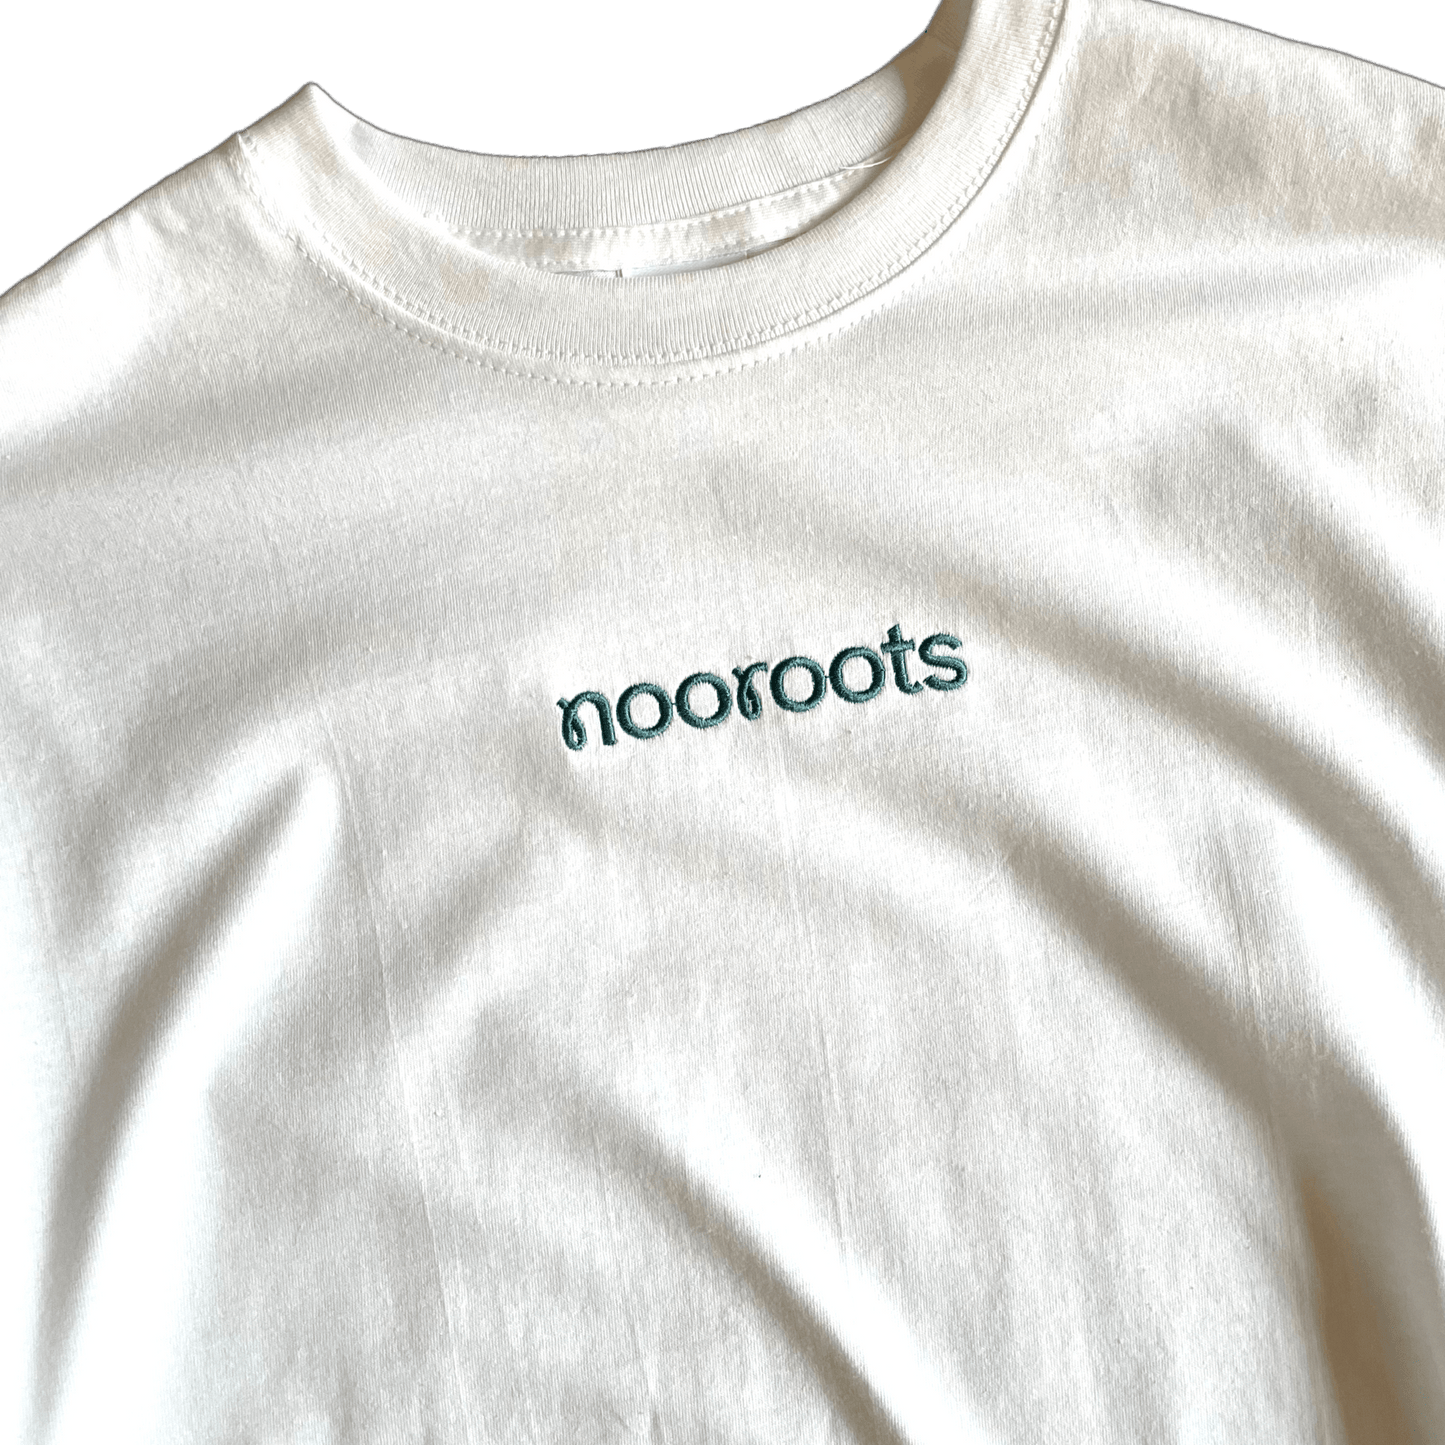 white tee shirt nooroots nootropic supplement zoomed